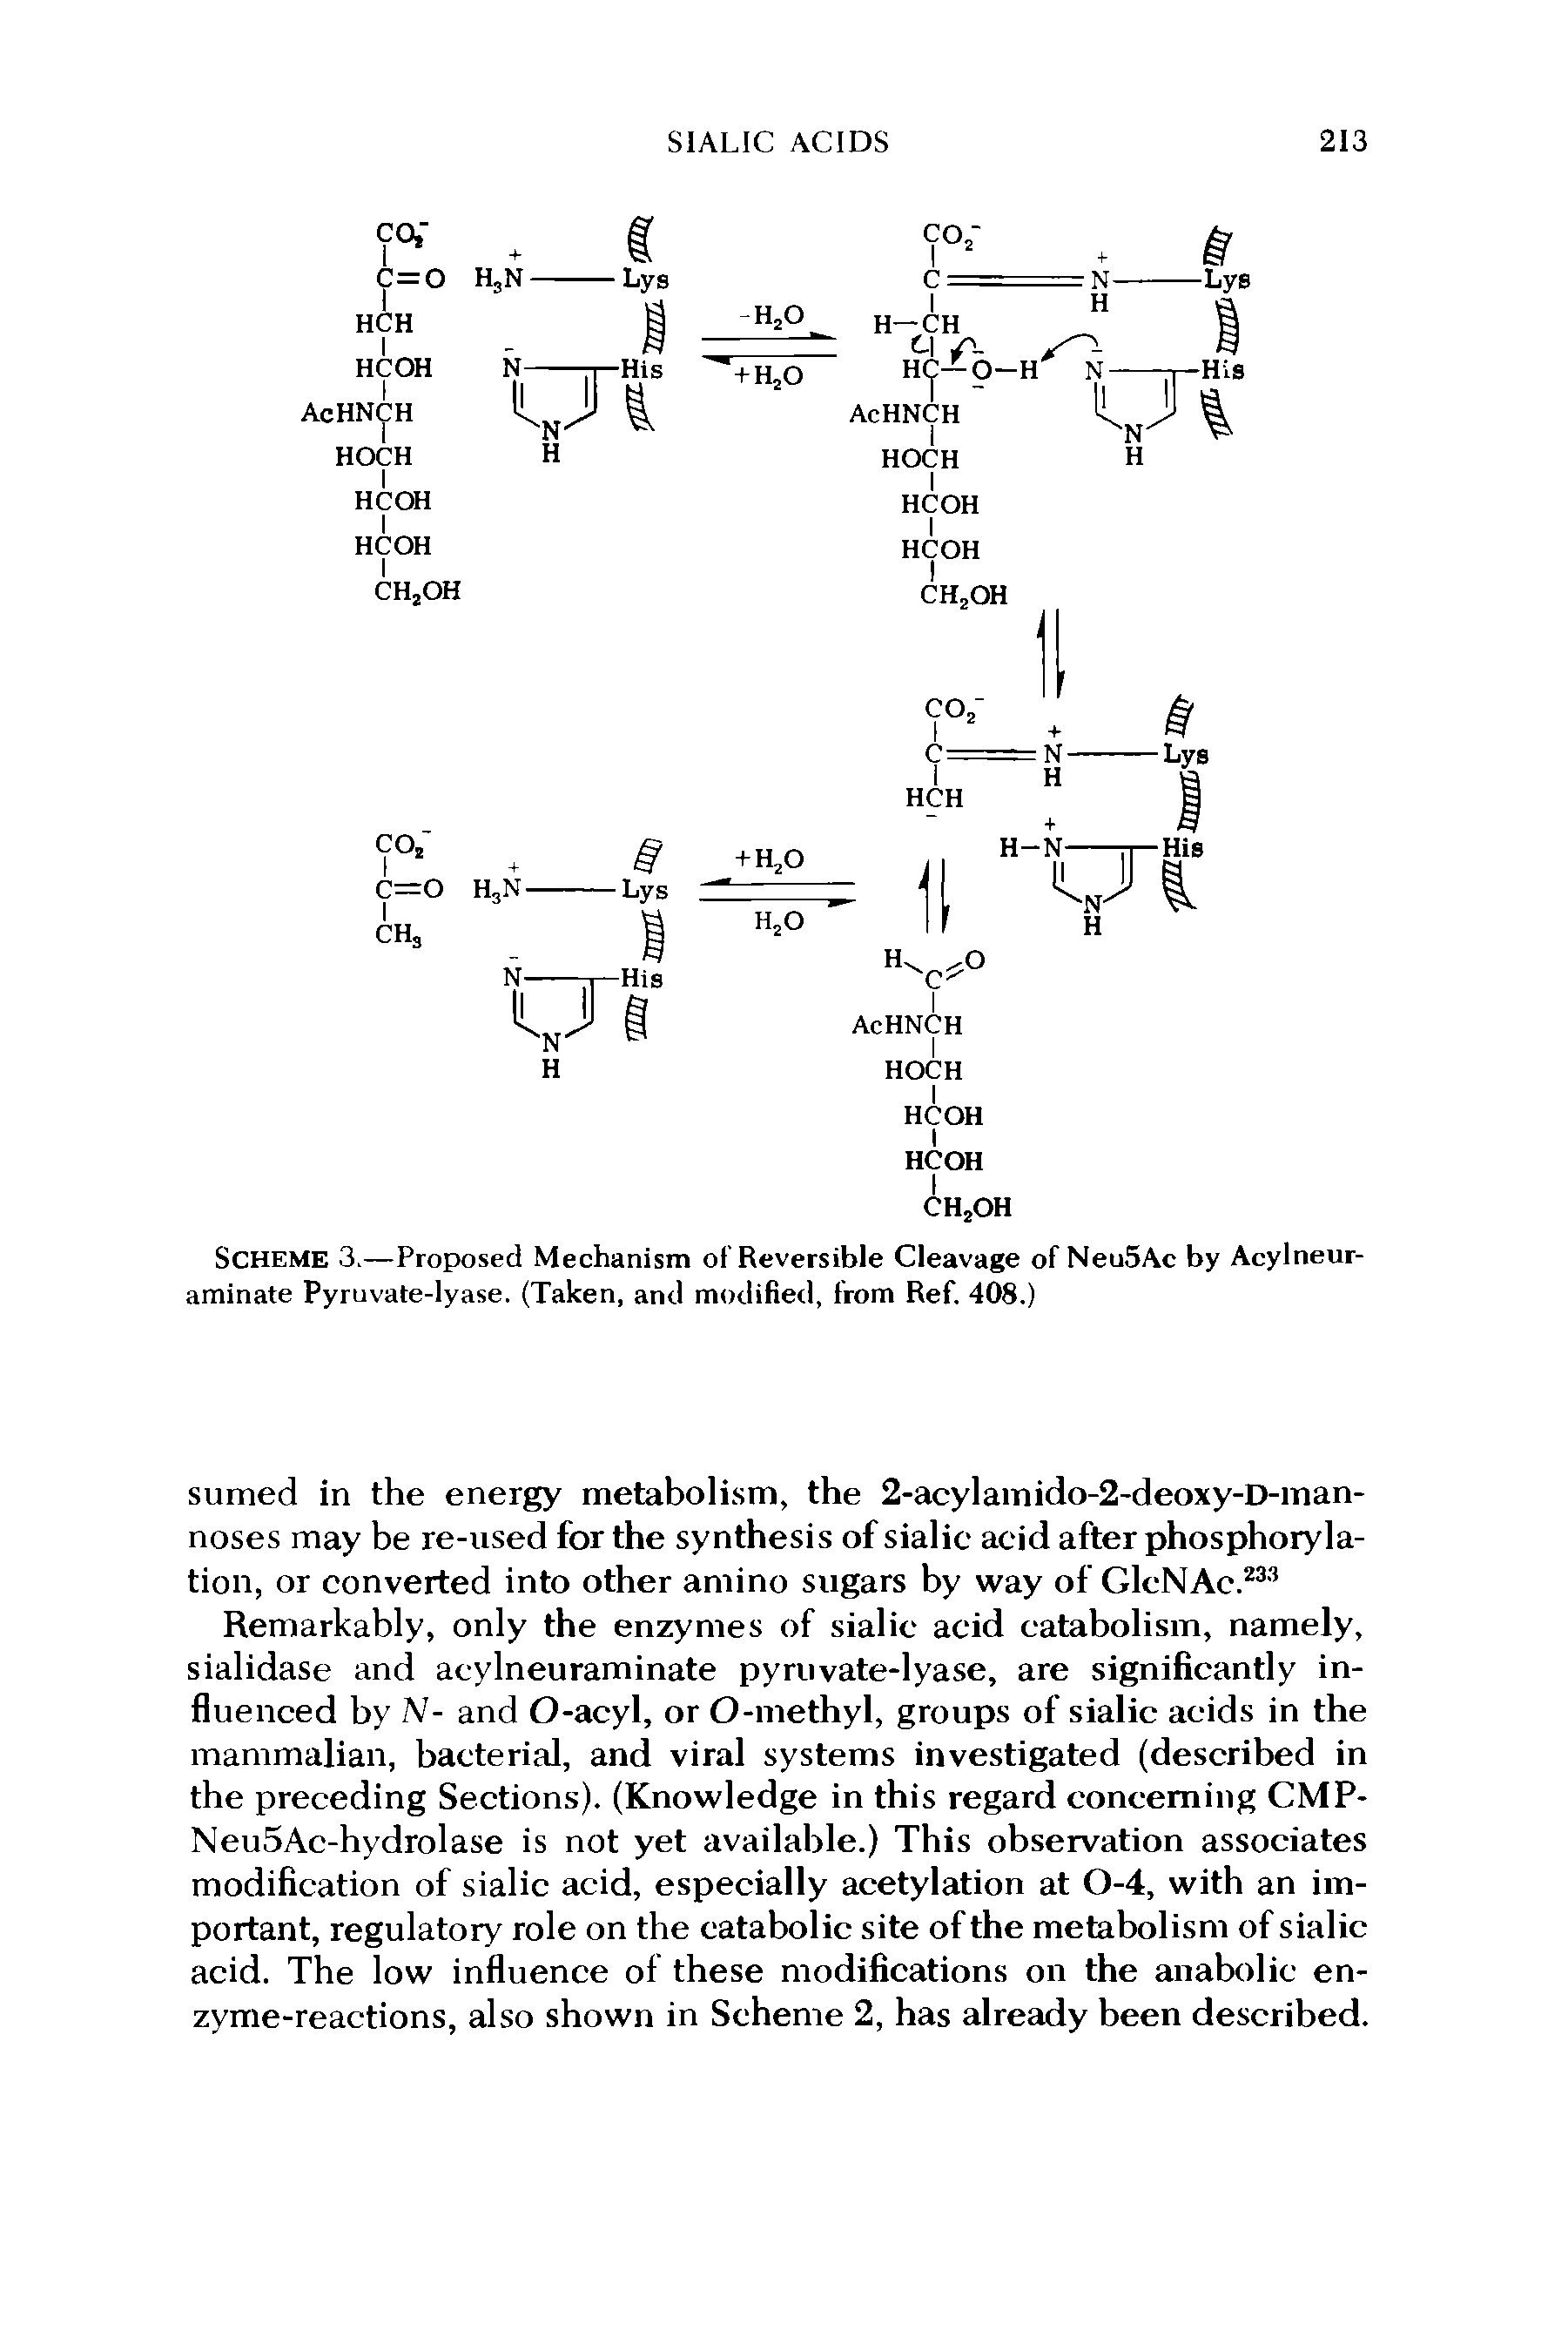 Scheme 3.—Proposed Mechanism of Reversible Cleavage of Neu5Ac by Acylneur-aminate Pyruvate-lyase. (Taken, and modified, from Ref. 408.)...